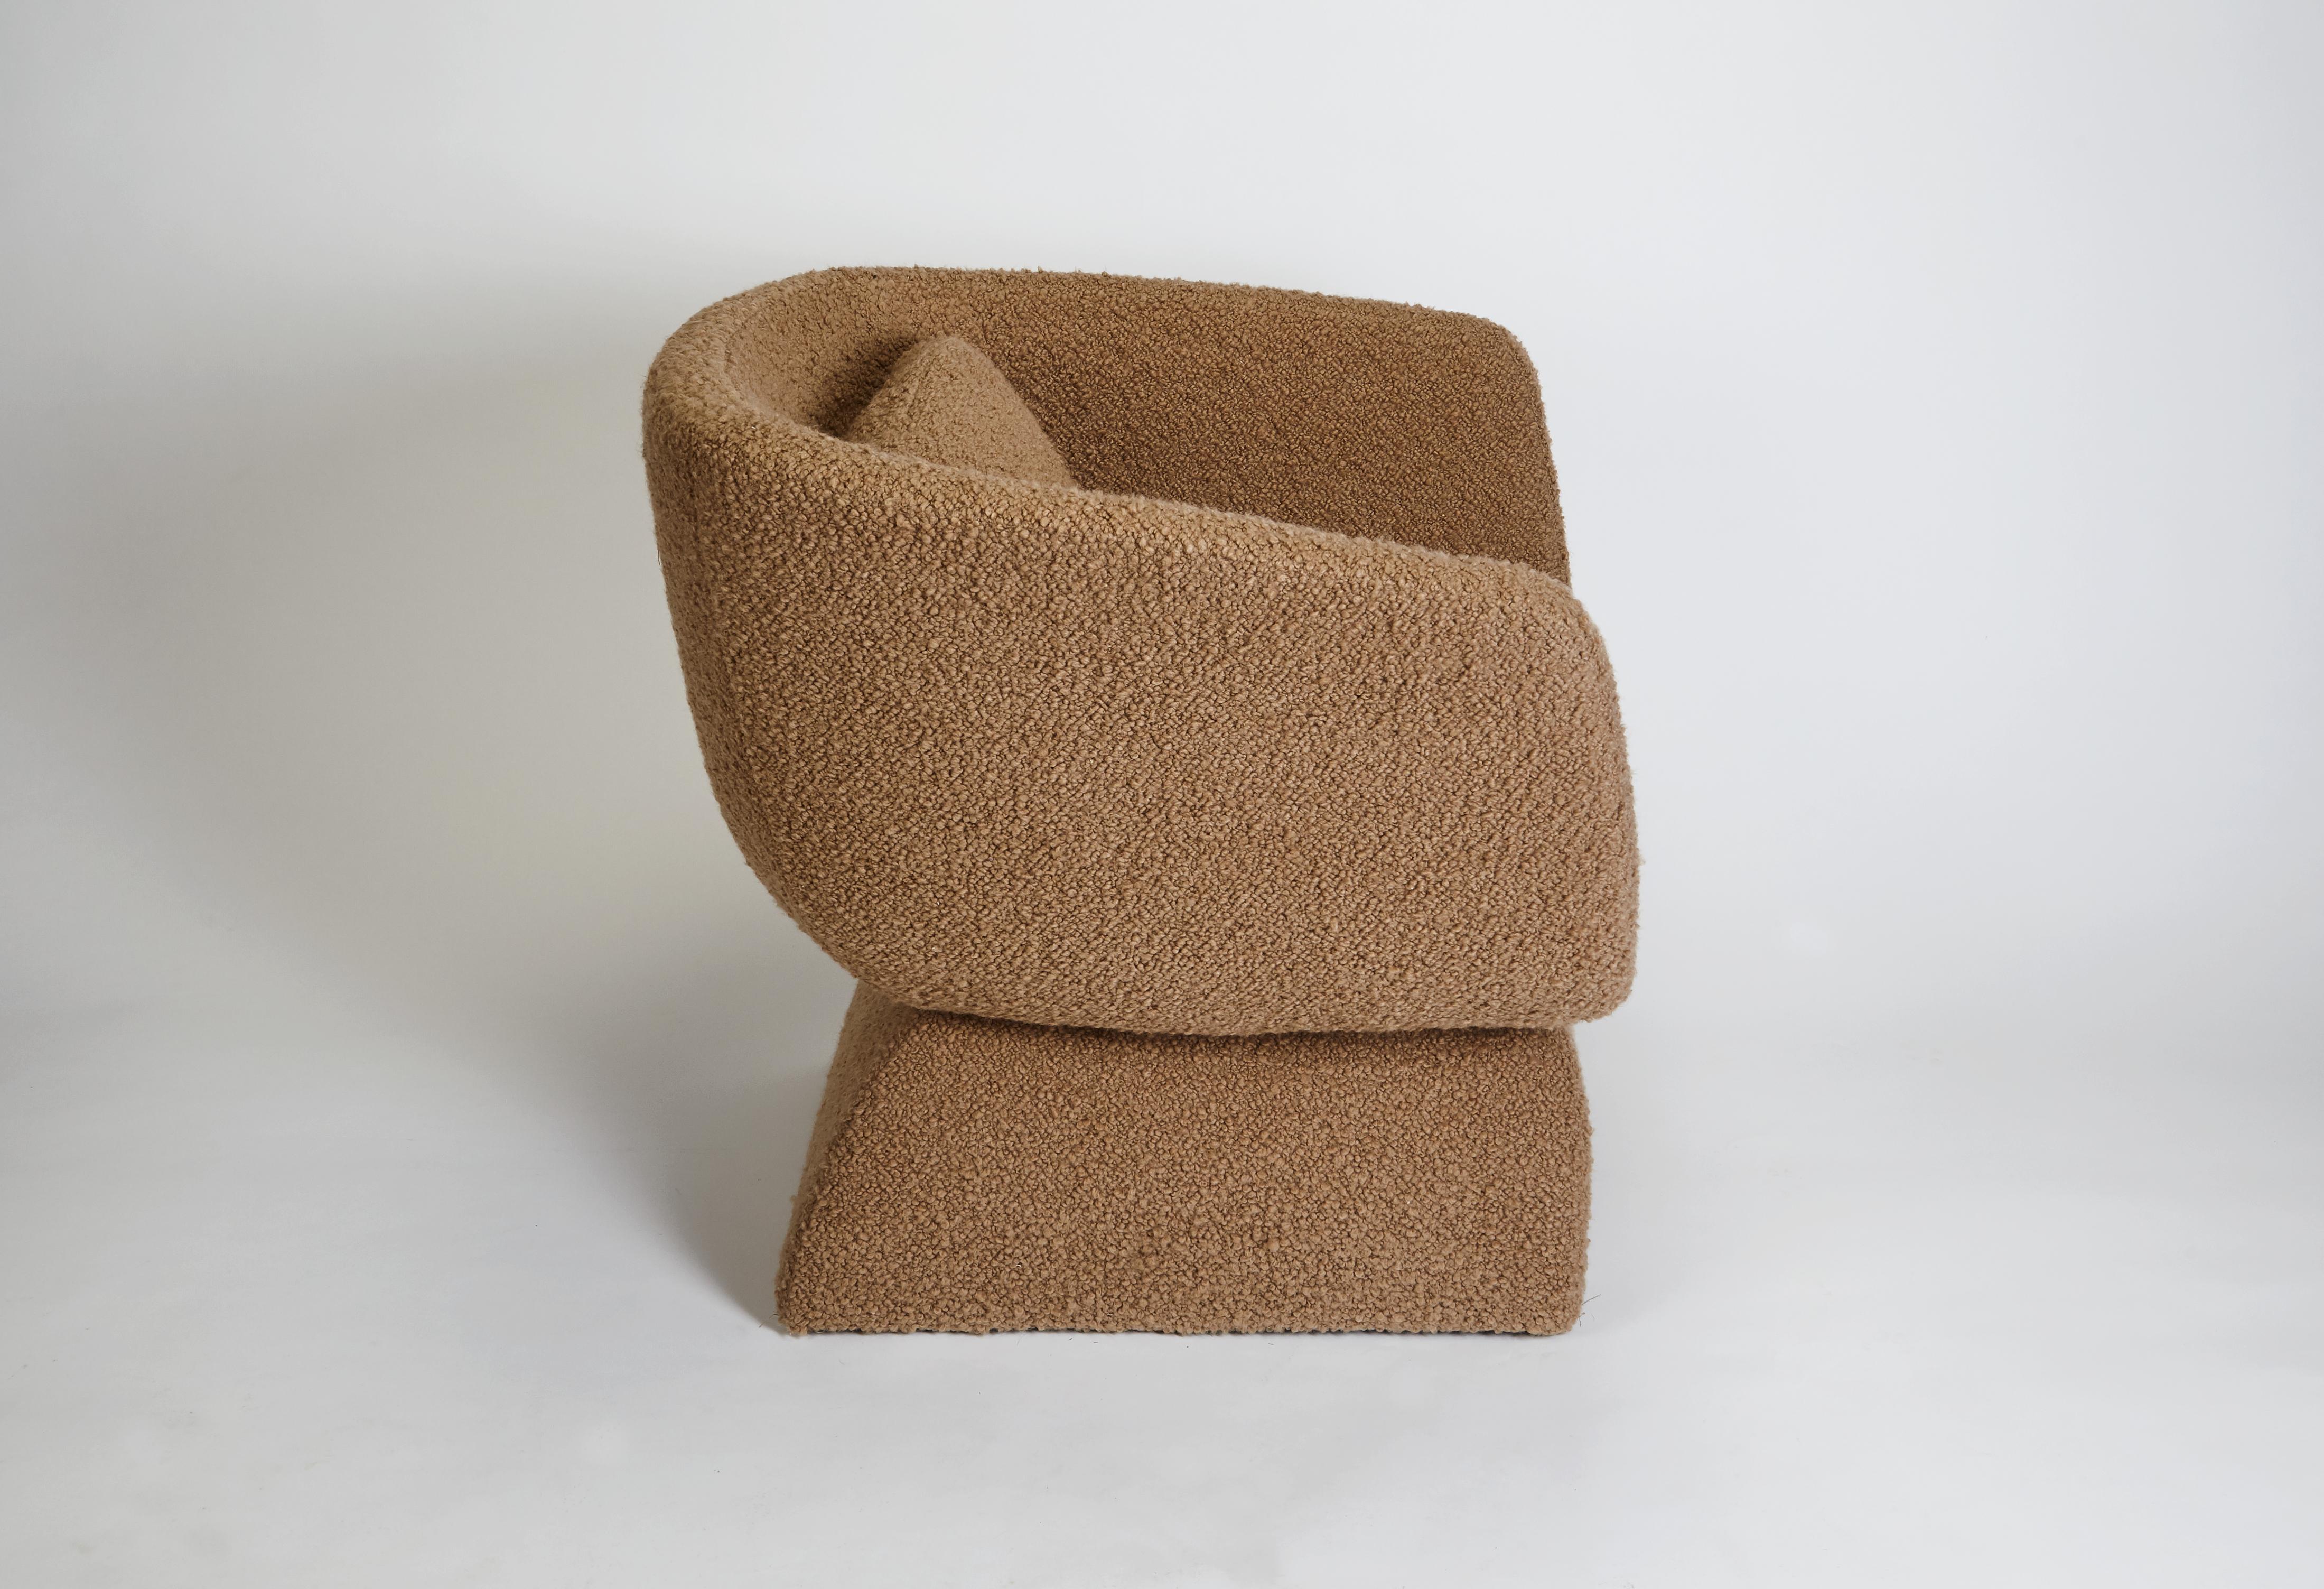 Oscar Armchair, Upholstered in Bouclé Fabric, Handcrafted in Portugal by Duistt

Inspired by the poetic curved lines of Oscar Niemeyer’s architecture, Oscar armchair allures for its sensual and free-flowing curves. Like Niemeyer once said “Curves